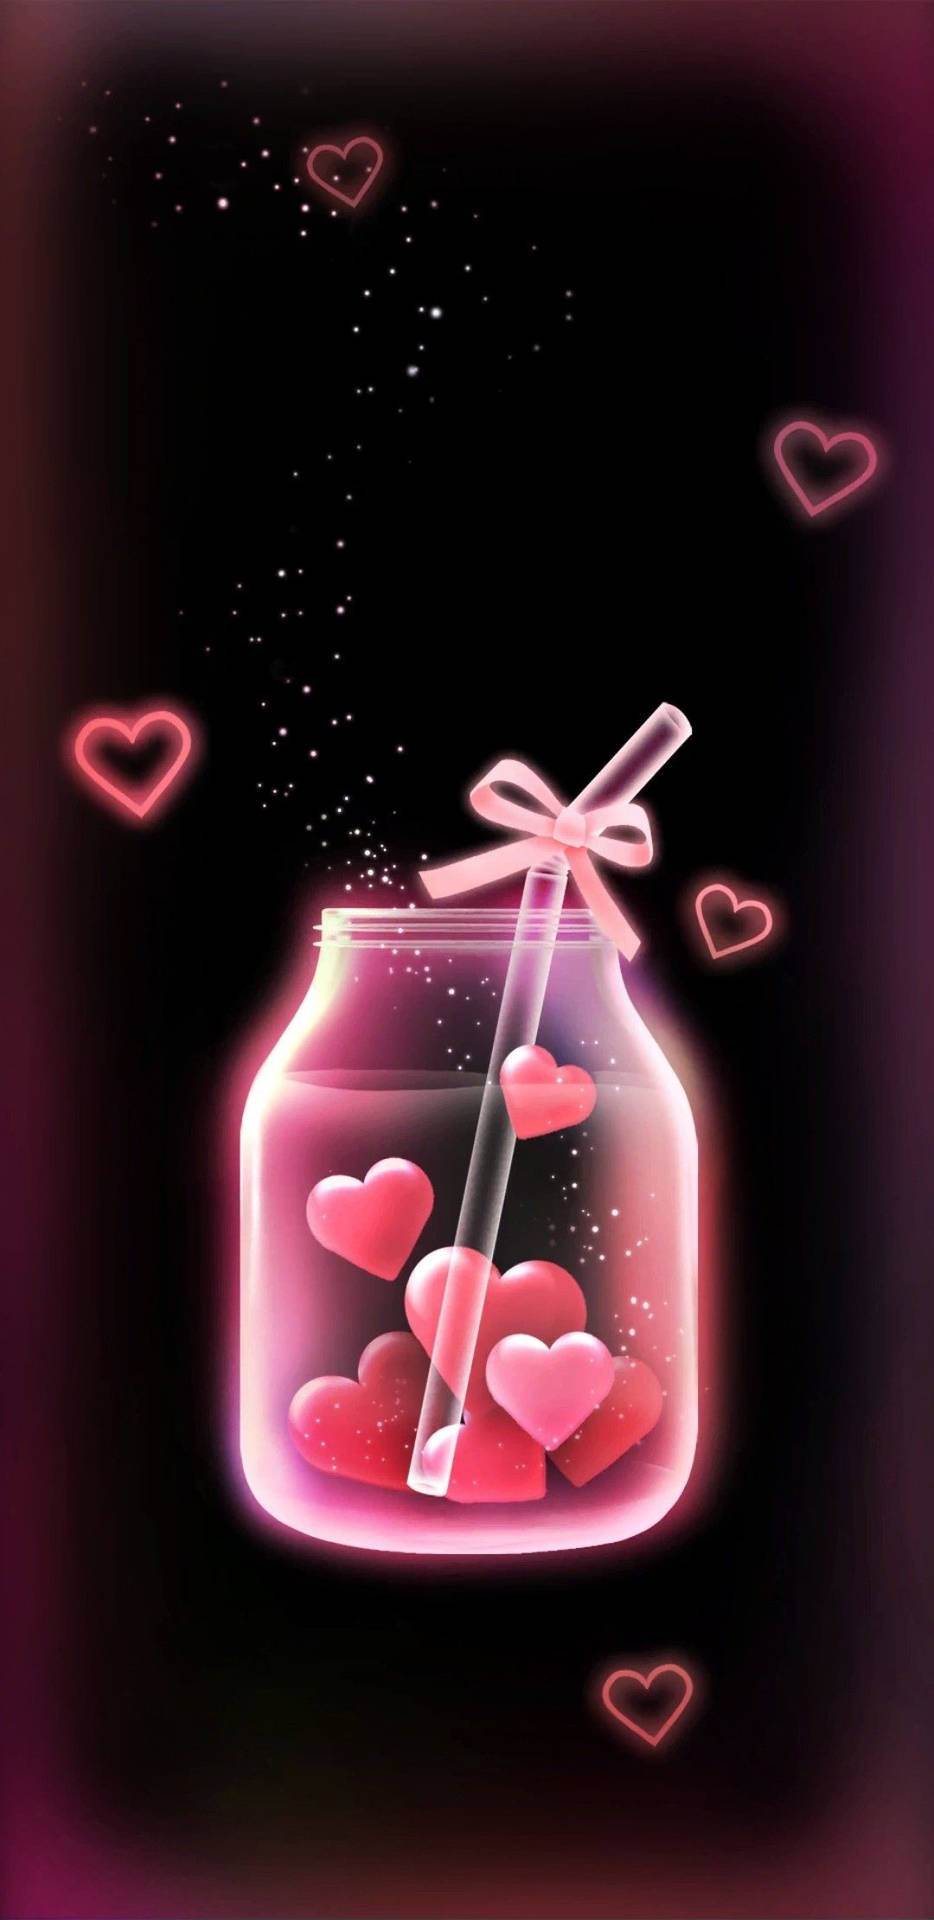 Jar Of Hearts For Valentines Day Wallpaper